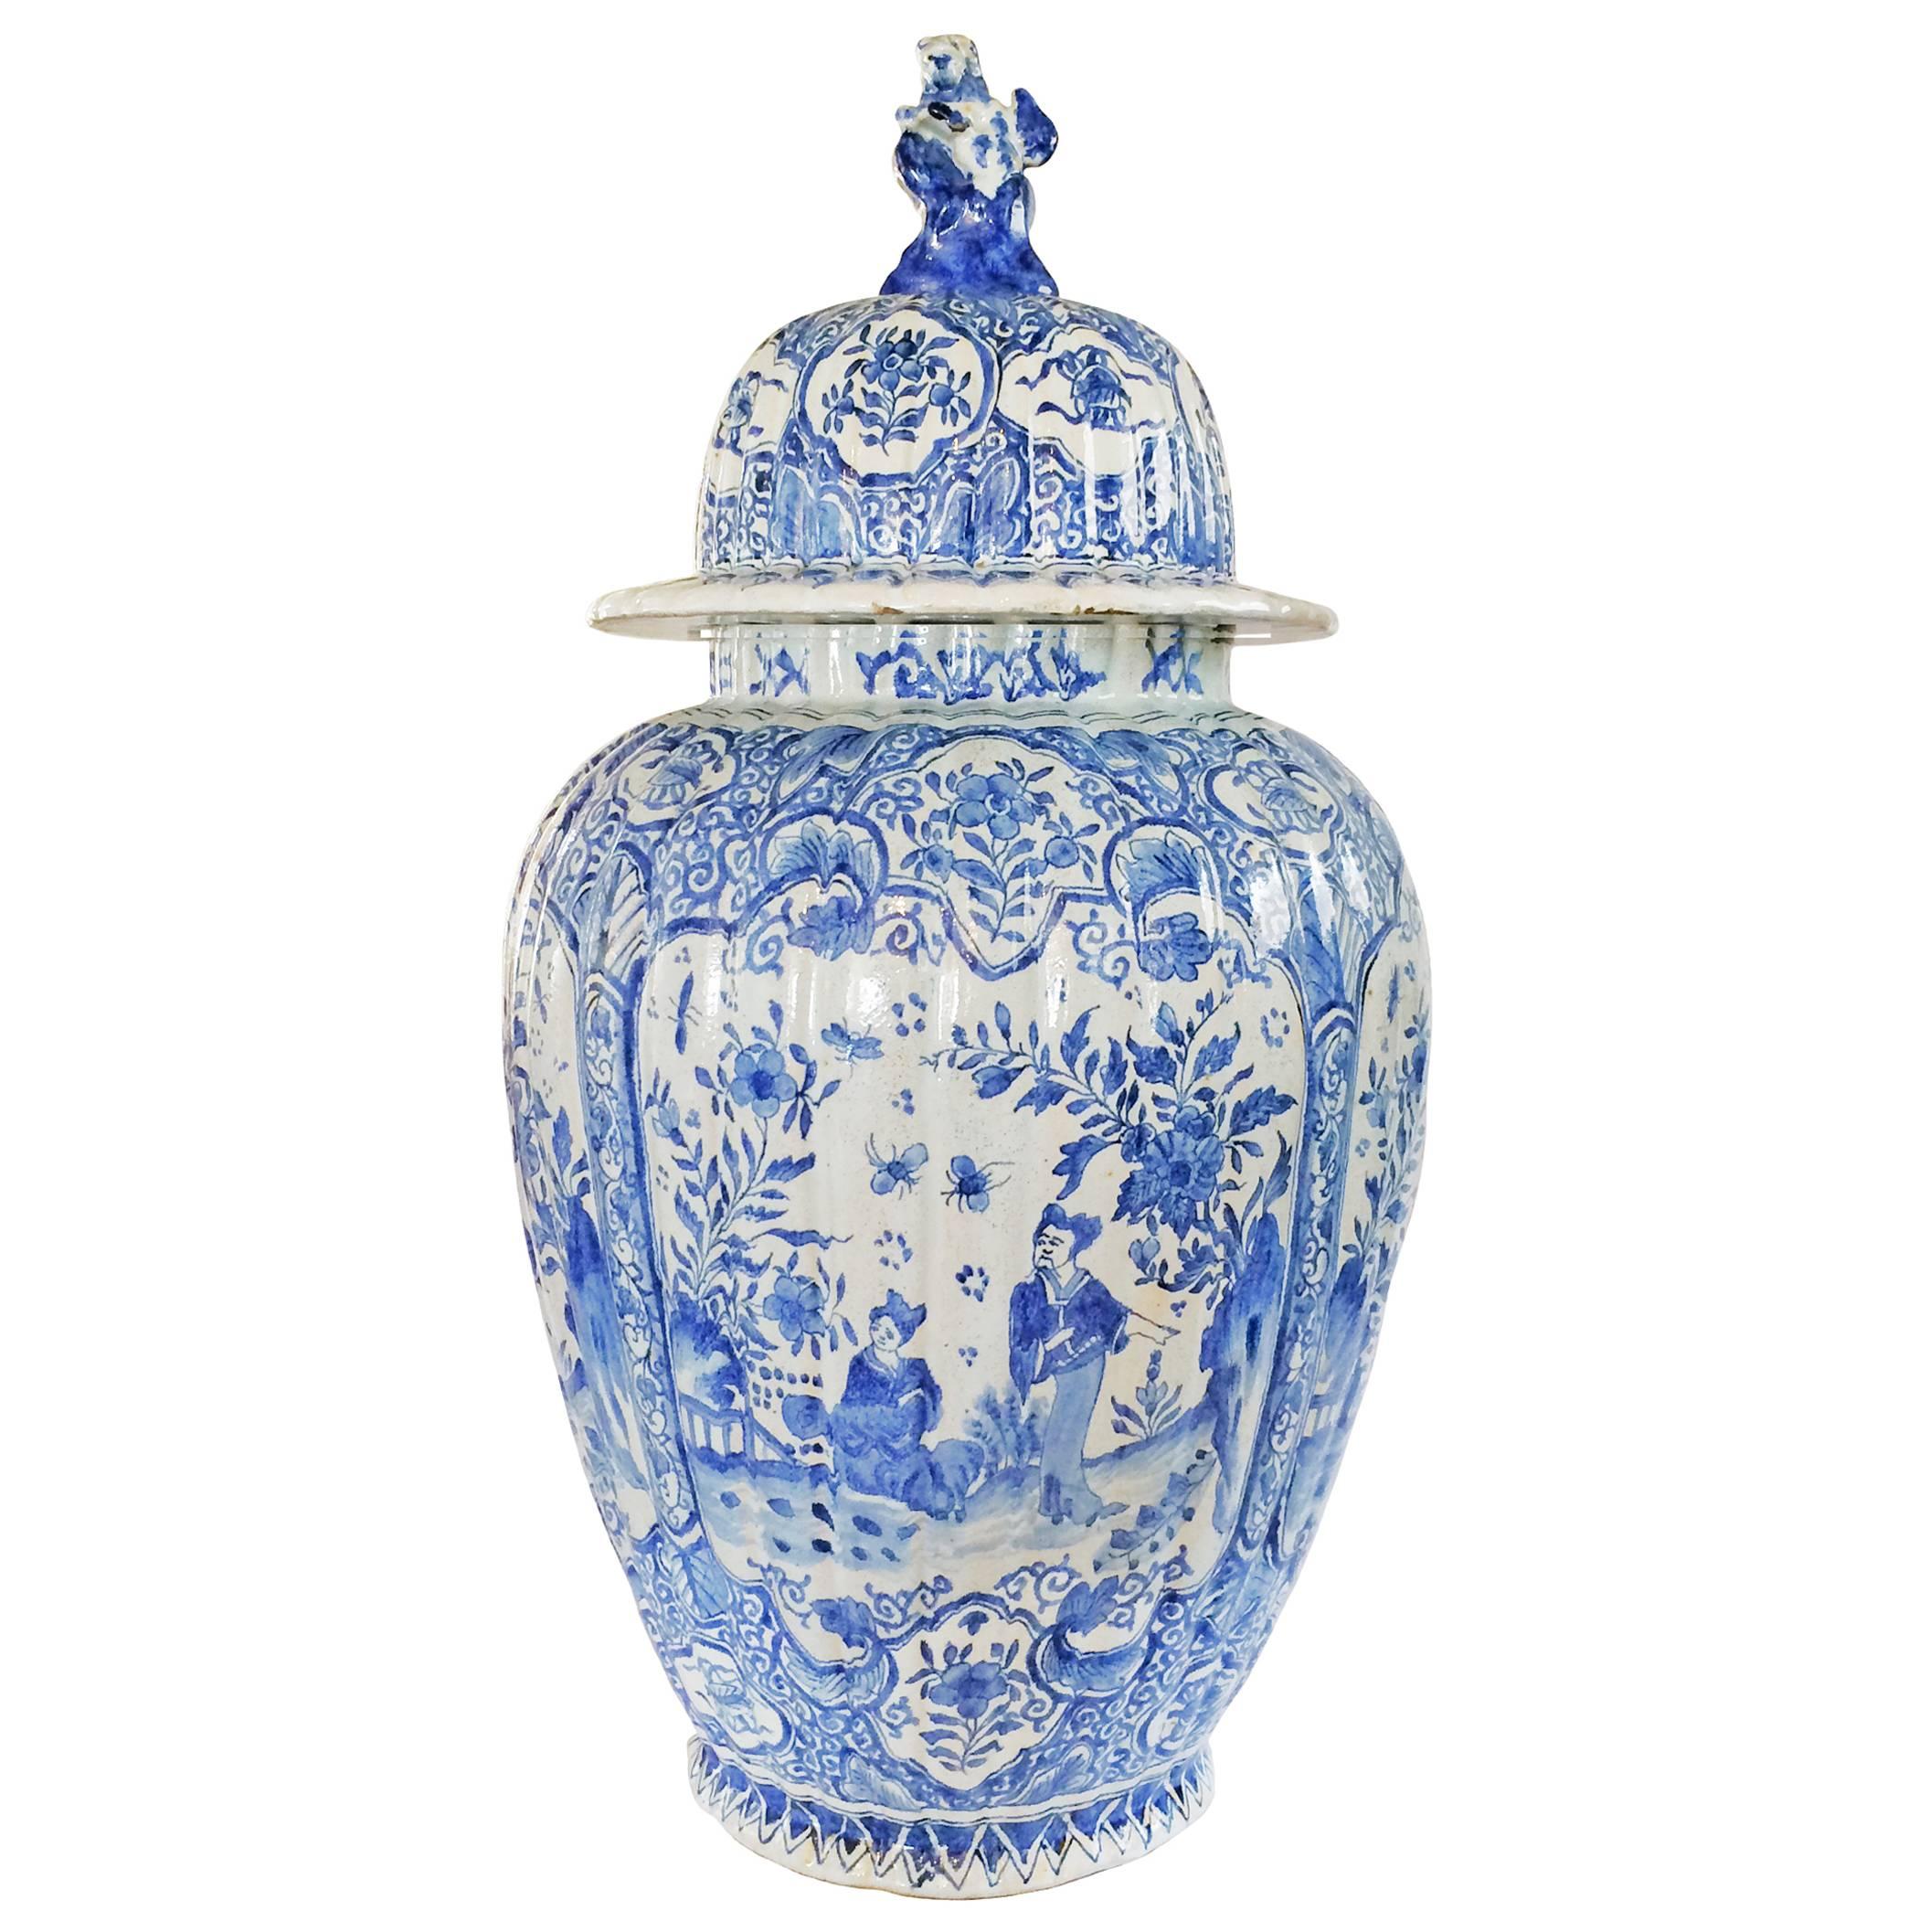 A rare and unusual pair of very large pale blue Delft lobed Baluster covered jars in the chinoiserie style, circa 1830.
 